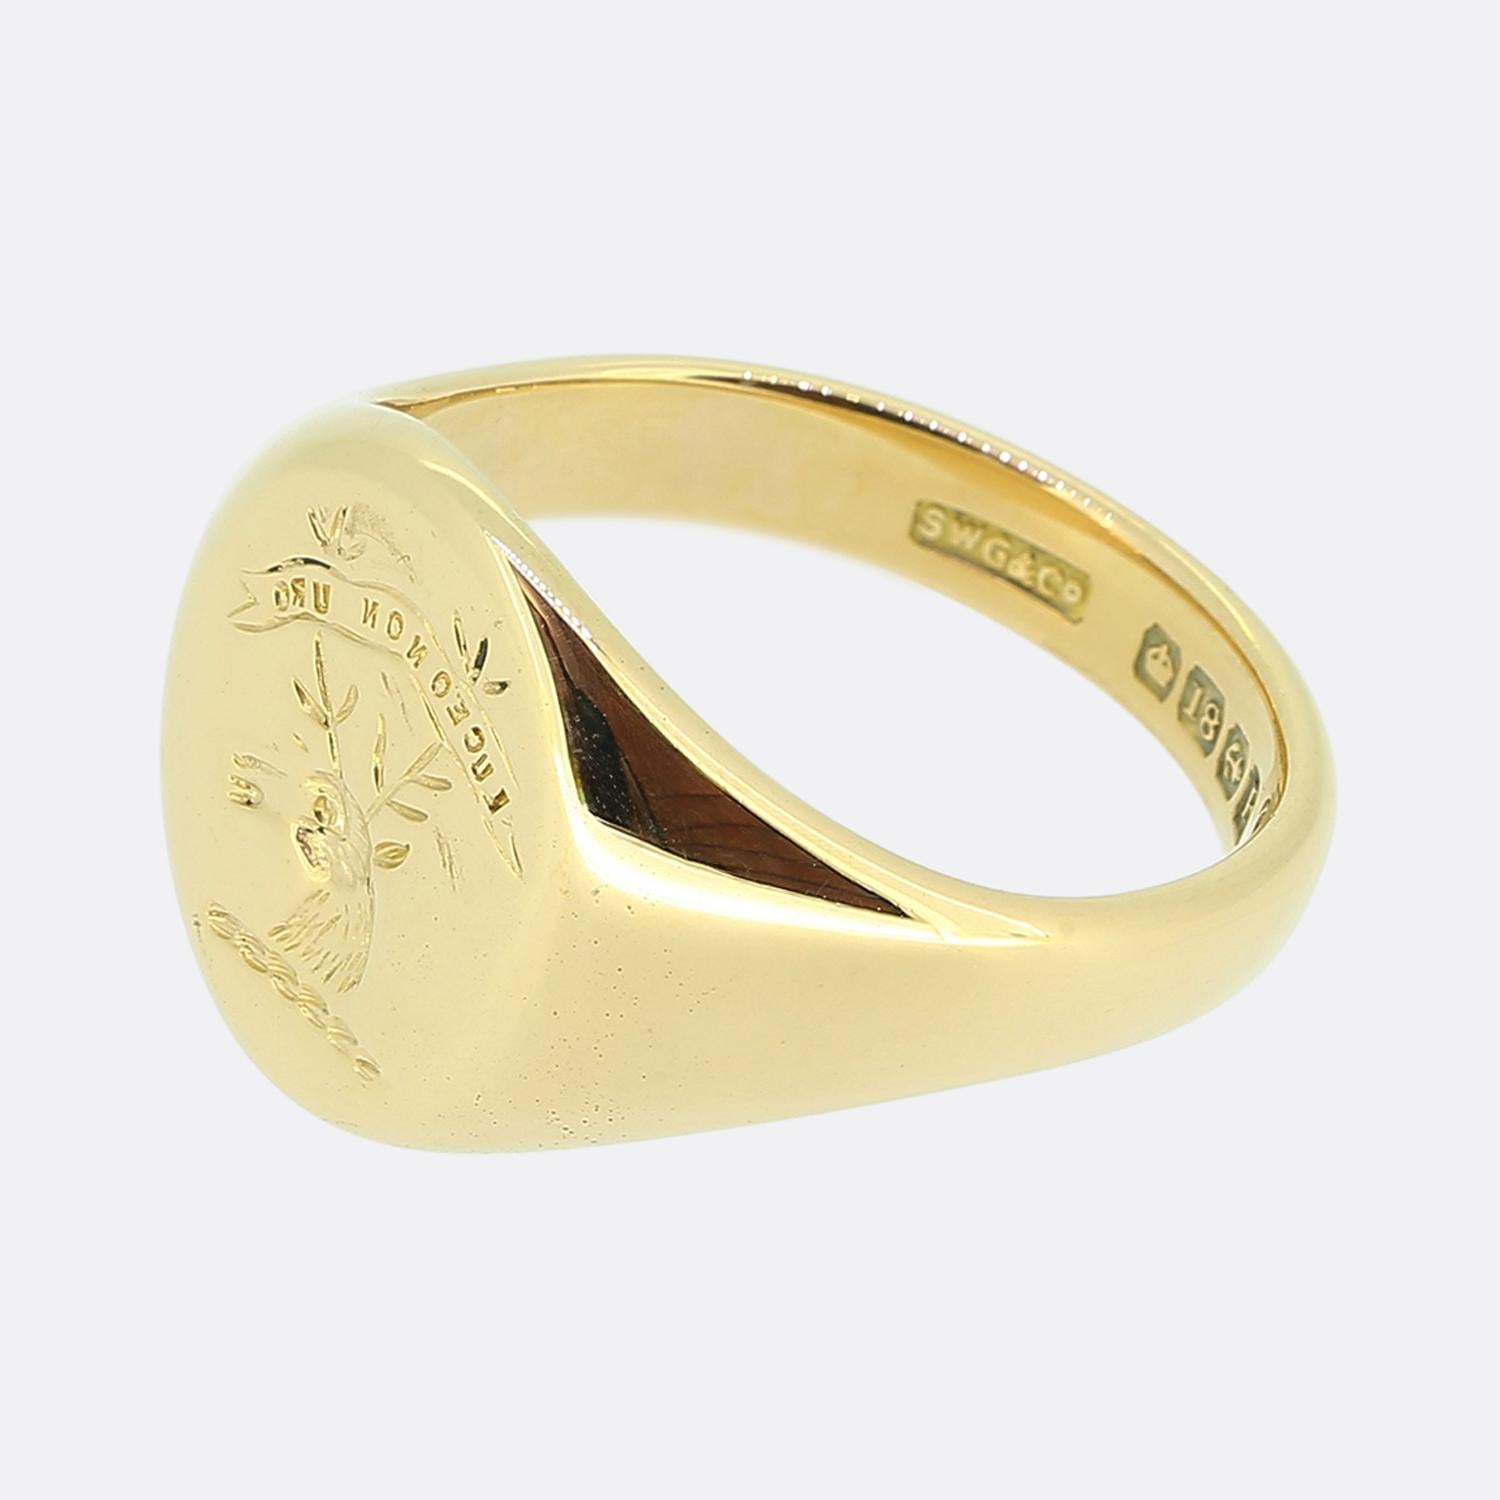 Here we have an 18ct yellow gold oval shaped signet ring. This vintage piece showcases a finely detailed deep intaglio of the head of a stag. 

Above the main design the words read 'LUCEO NON URO' which translates from Latin into English as 'I